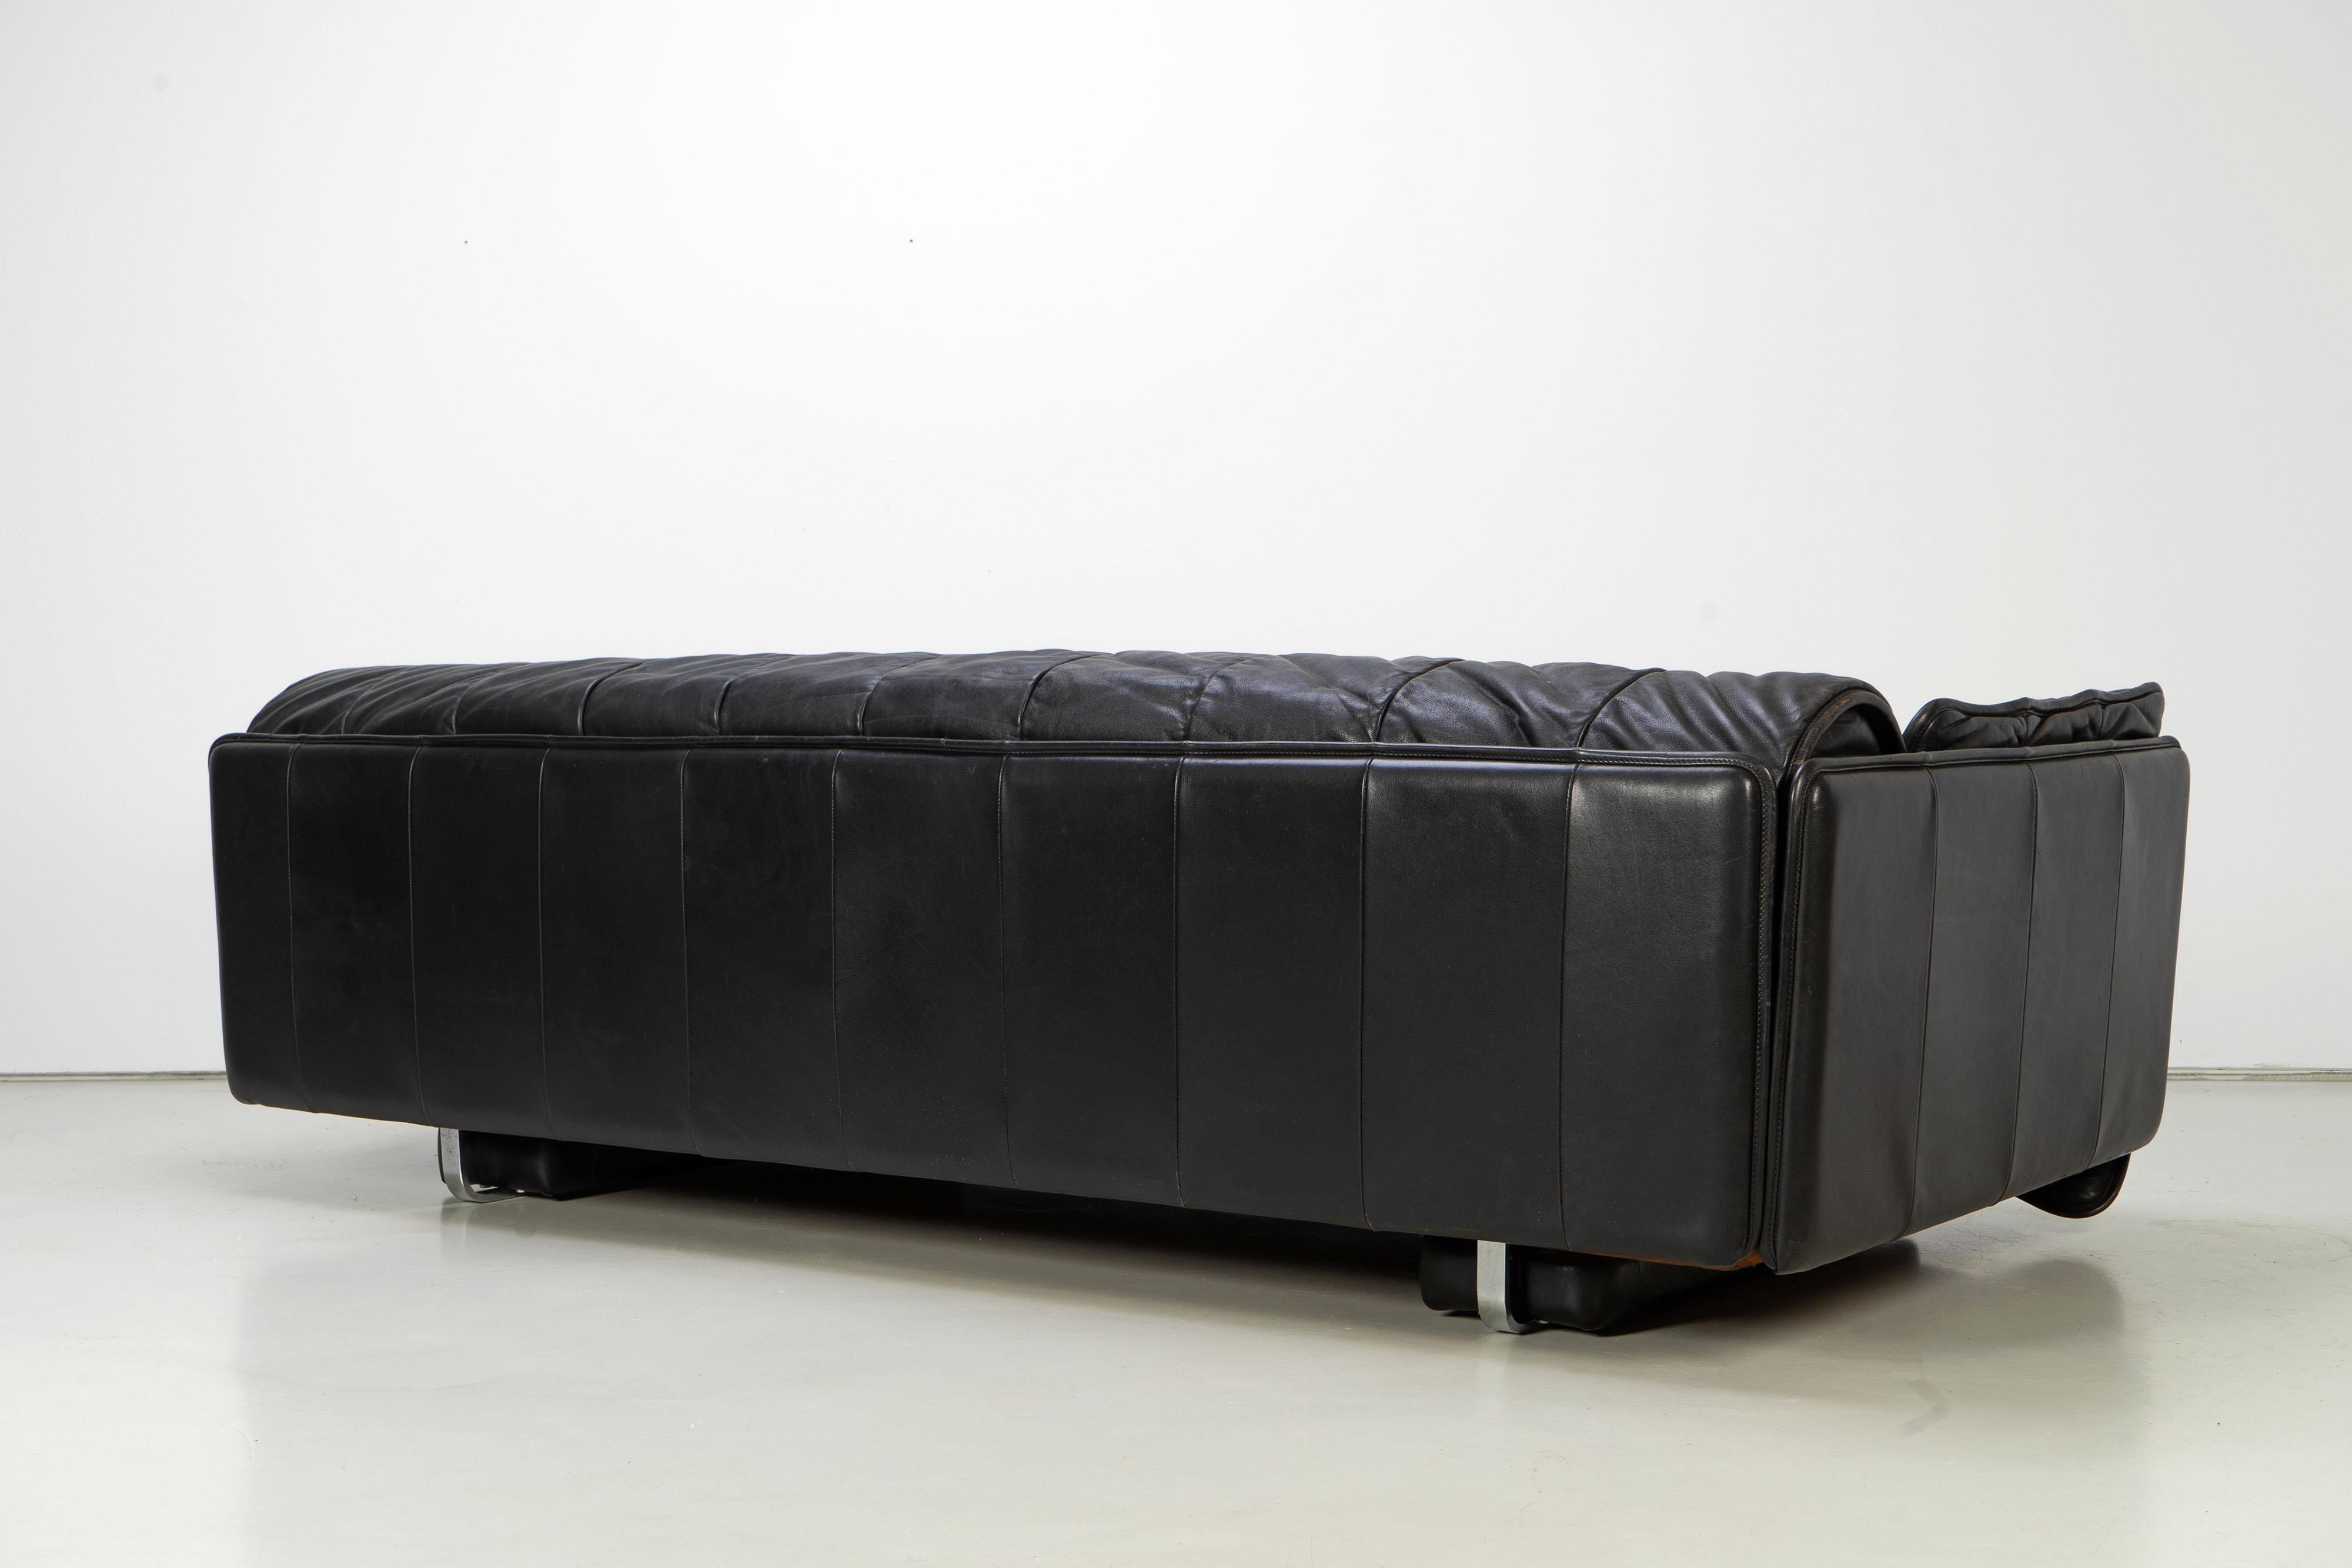 20th Century 1970s Sofa De Sede DS-69 Switzerland Black Leather Daybed